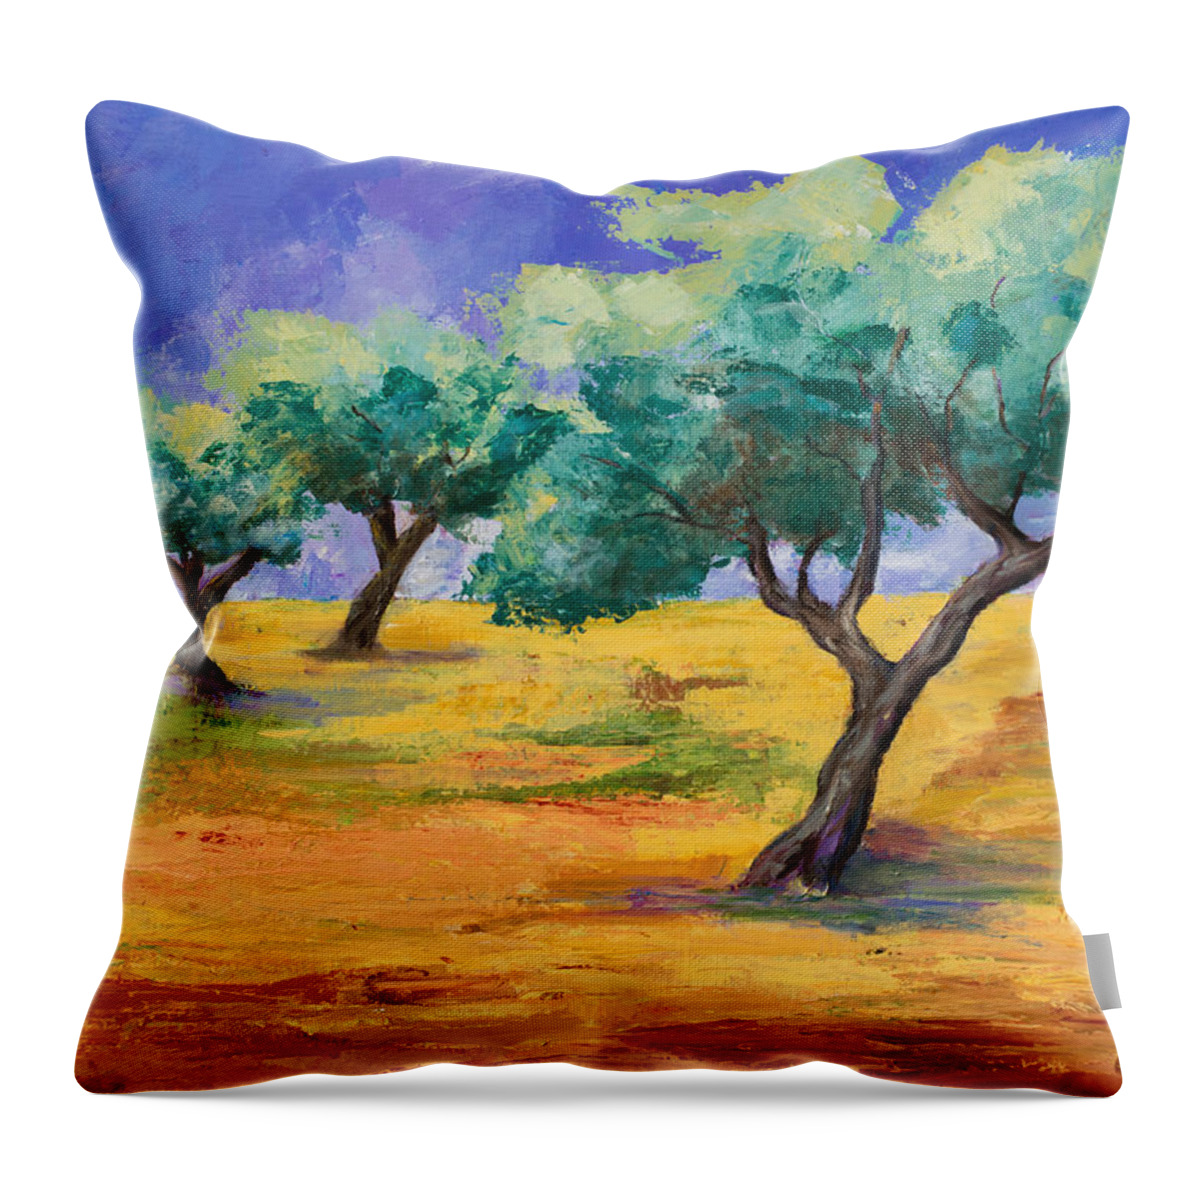 Olive Tree Grove Throw Pillow featuring the painting Olive Trees Grove by Elise Palmigiani